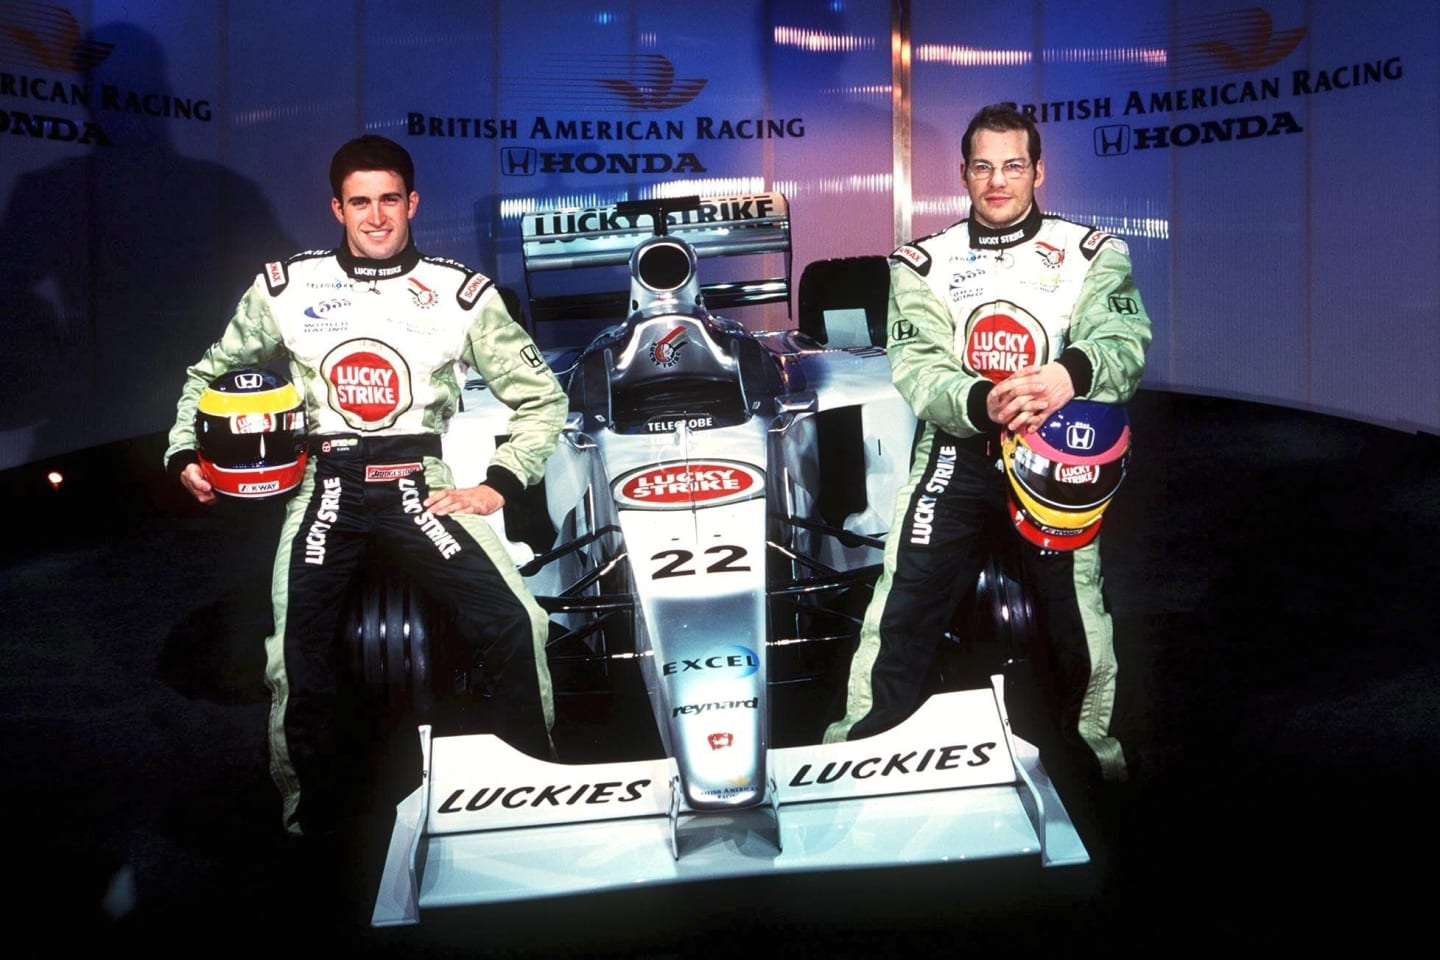 Honda powered British American Racing from the team’s second F1 season in 2000